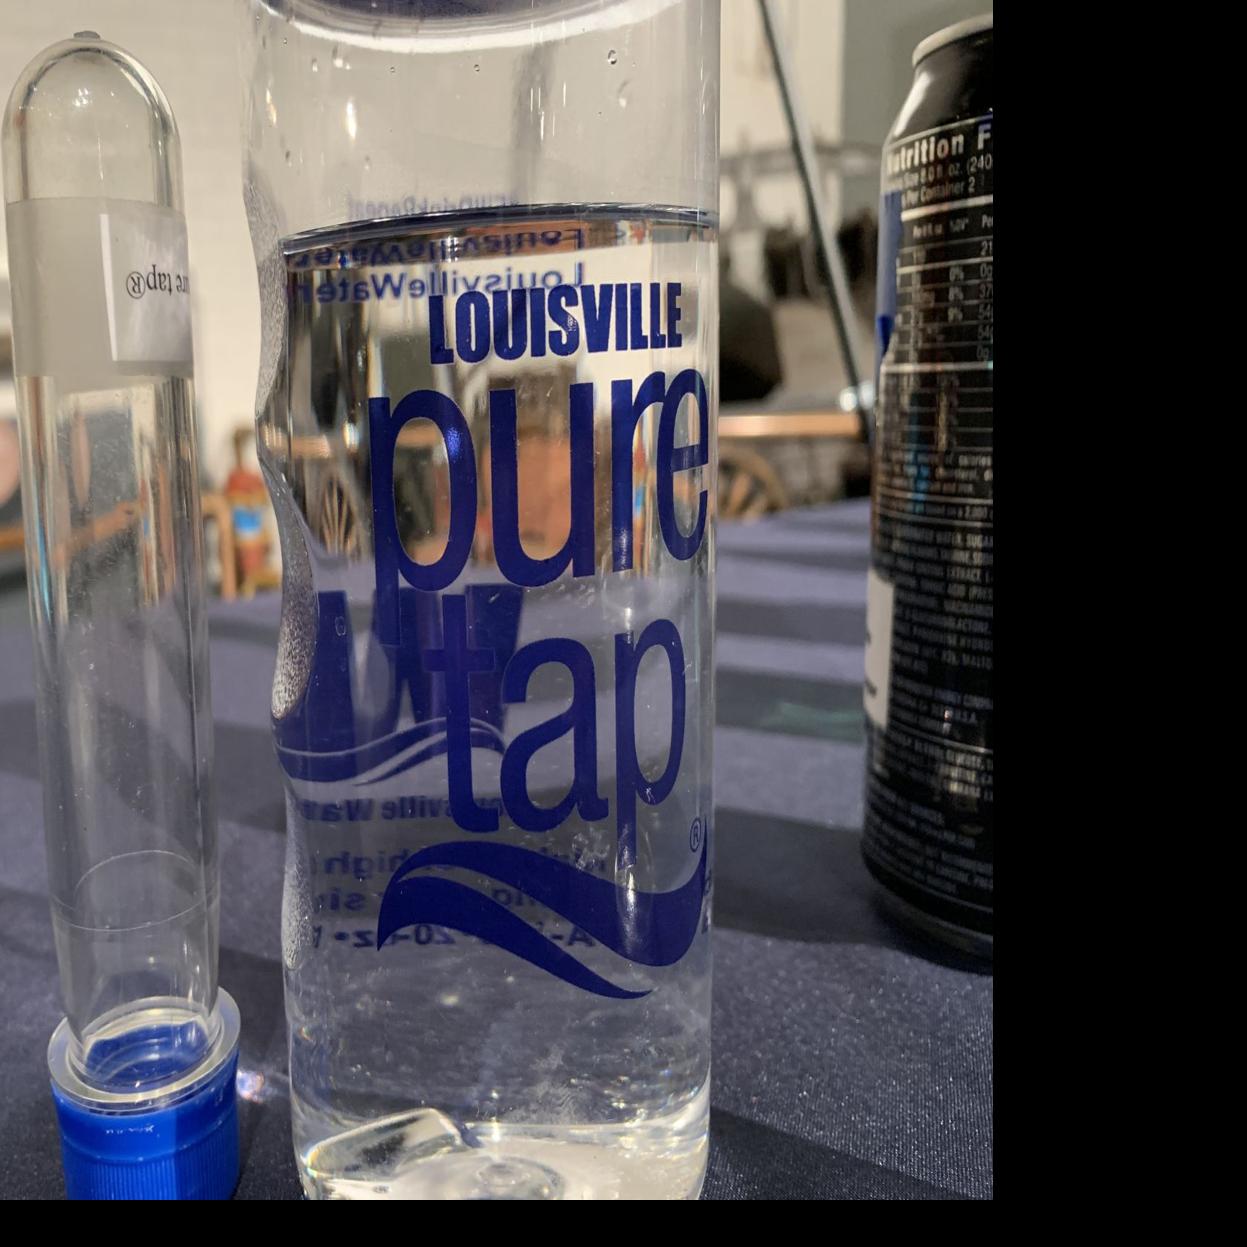 Louisville Water Company shows us the importance of water during